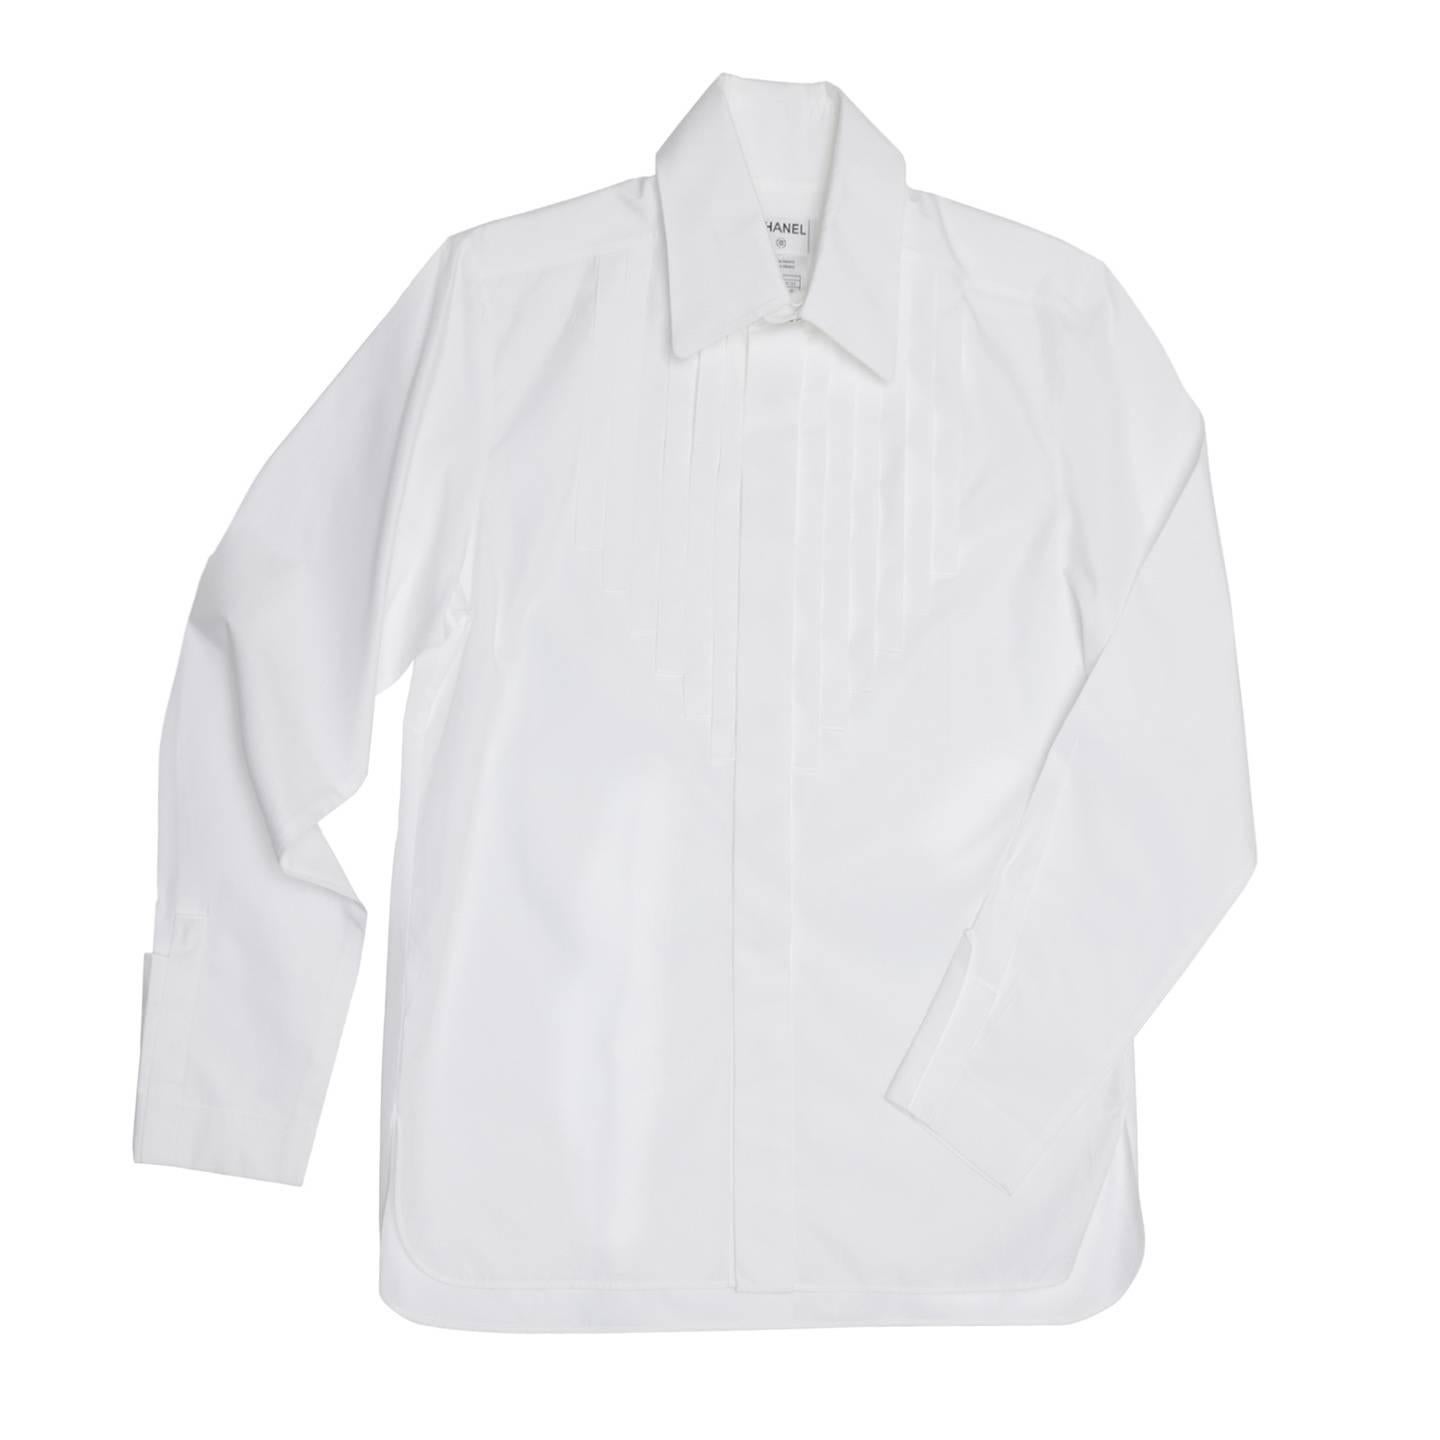 Pure white cotton shirt with large rounded peter pan collar standing on a higher neck that fastens with two white and metal buttons. The buttons at center front are hidden under a wide placket and a bib detail repeats this detail with vertical and